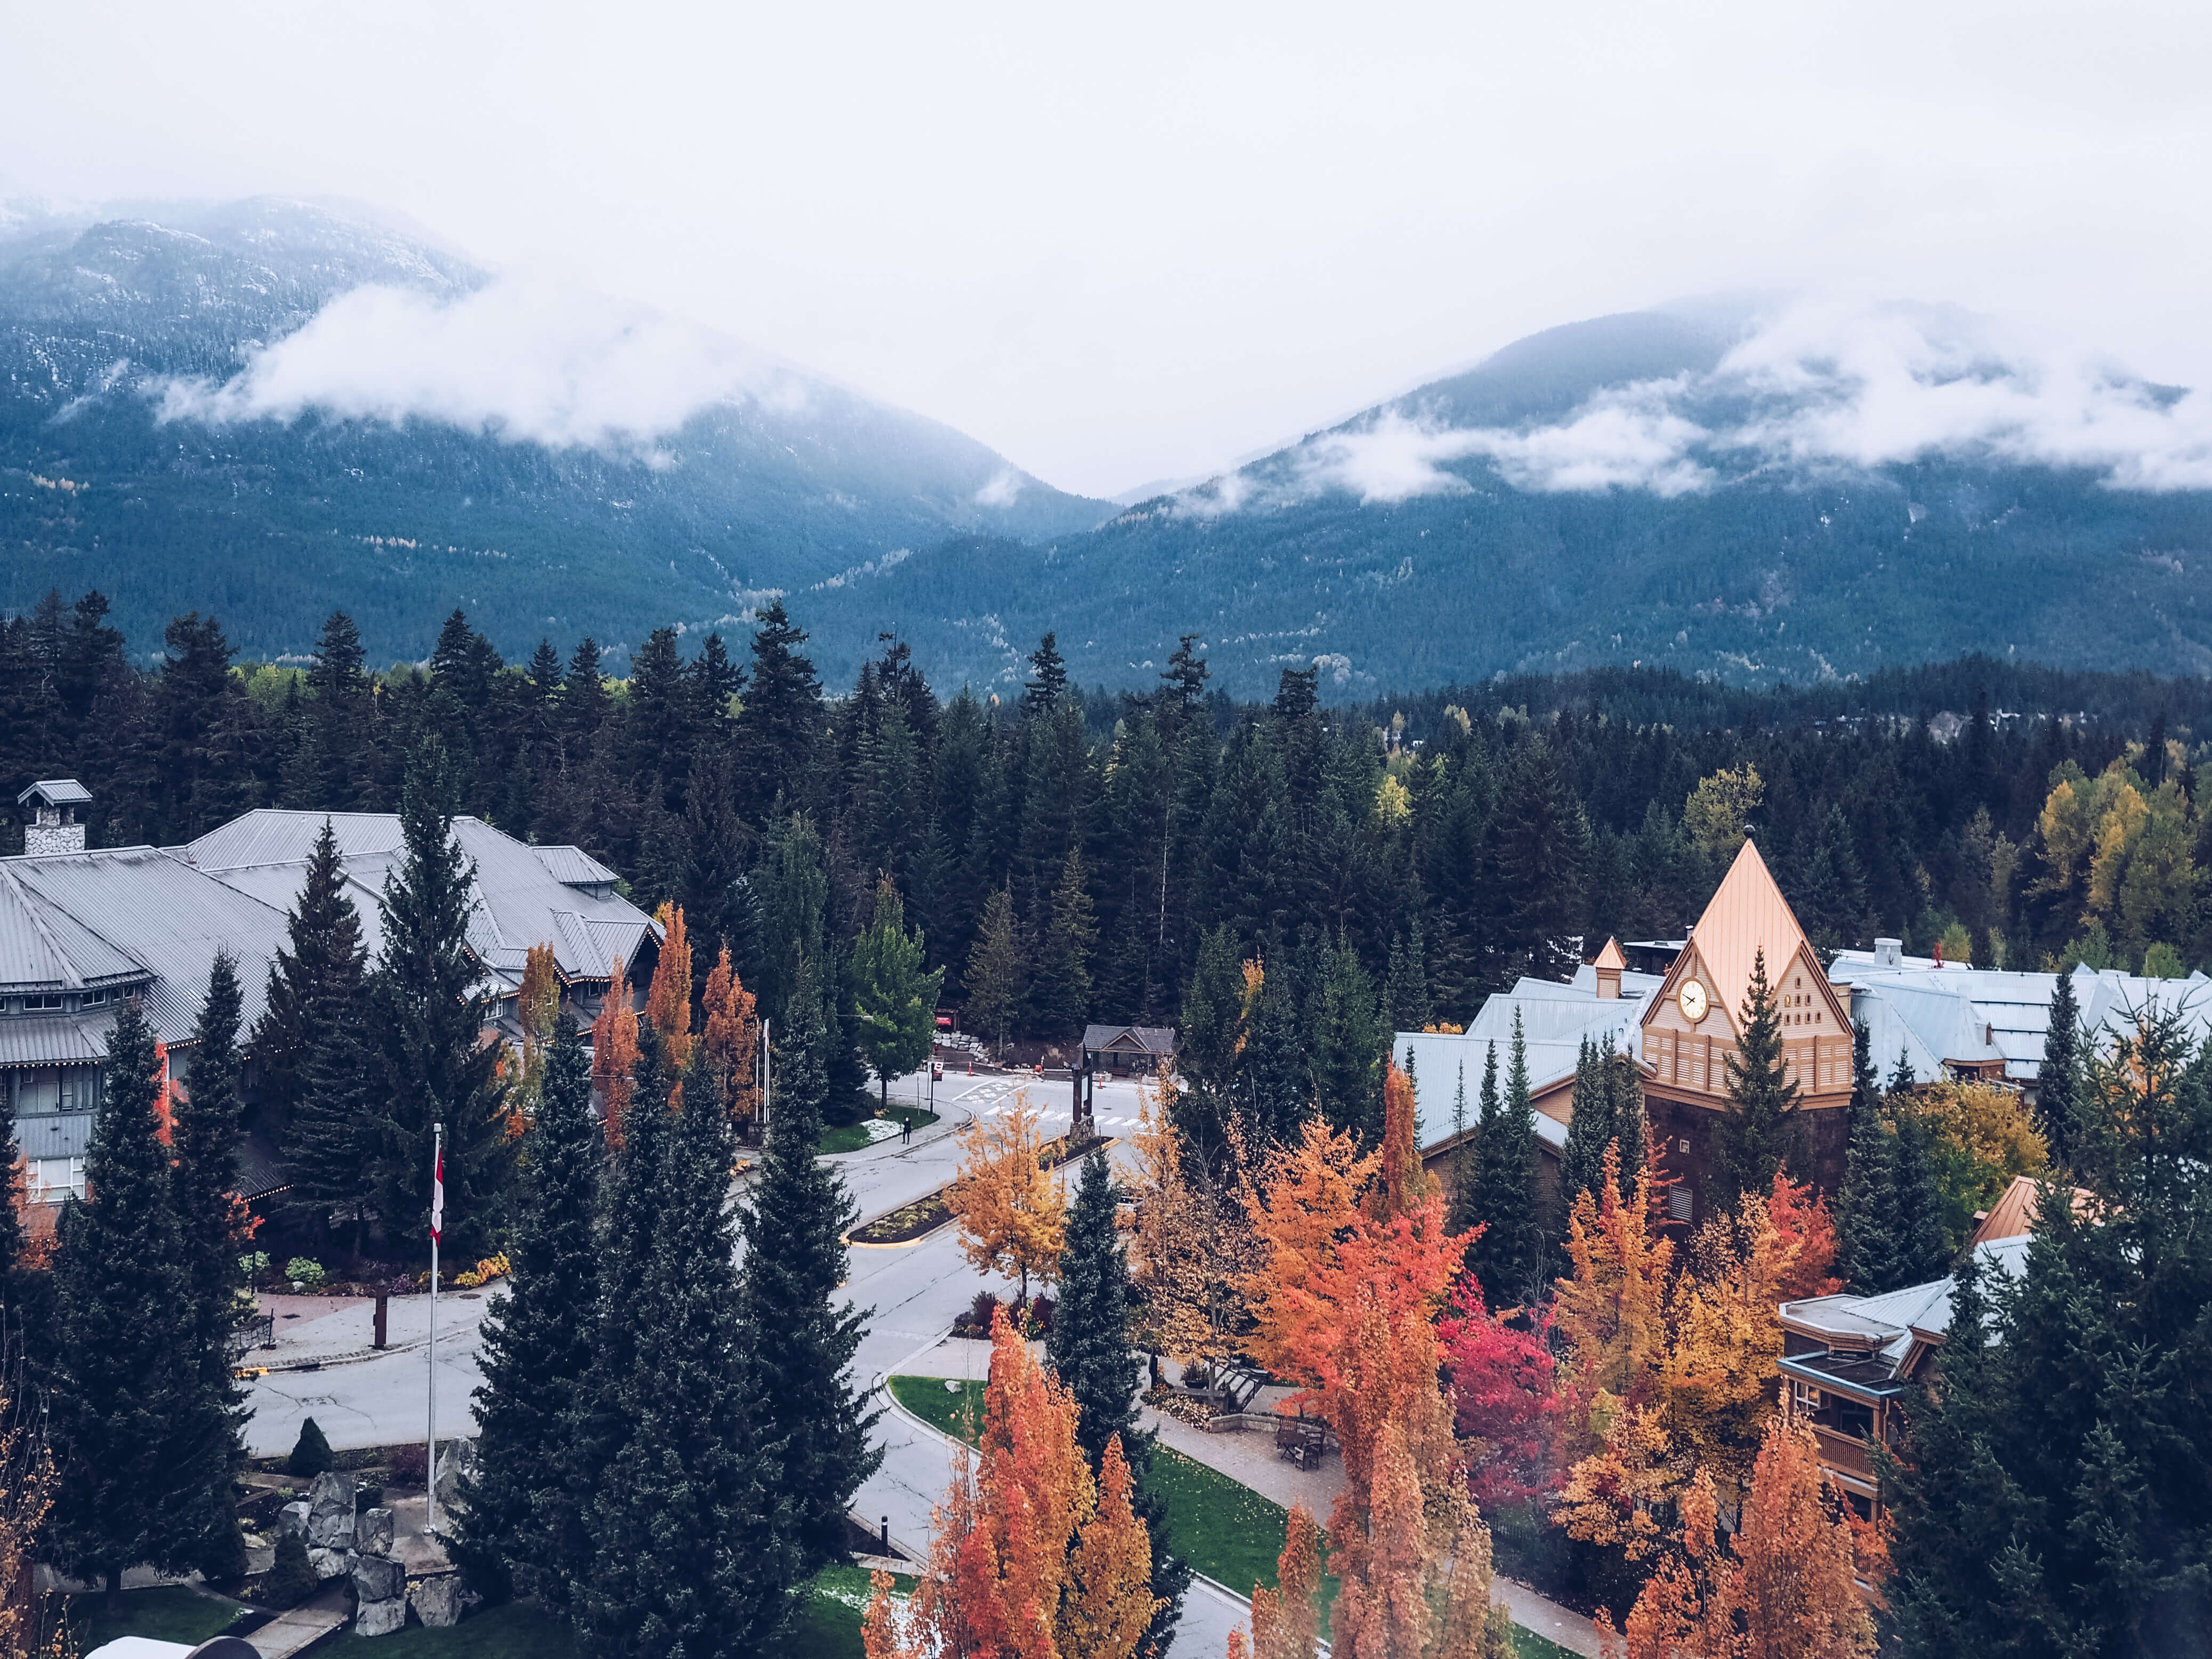 Luxury Weekend at The Chateau Whistler